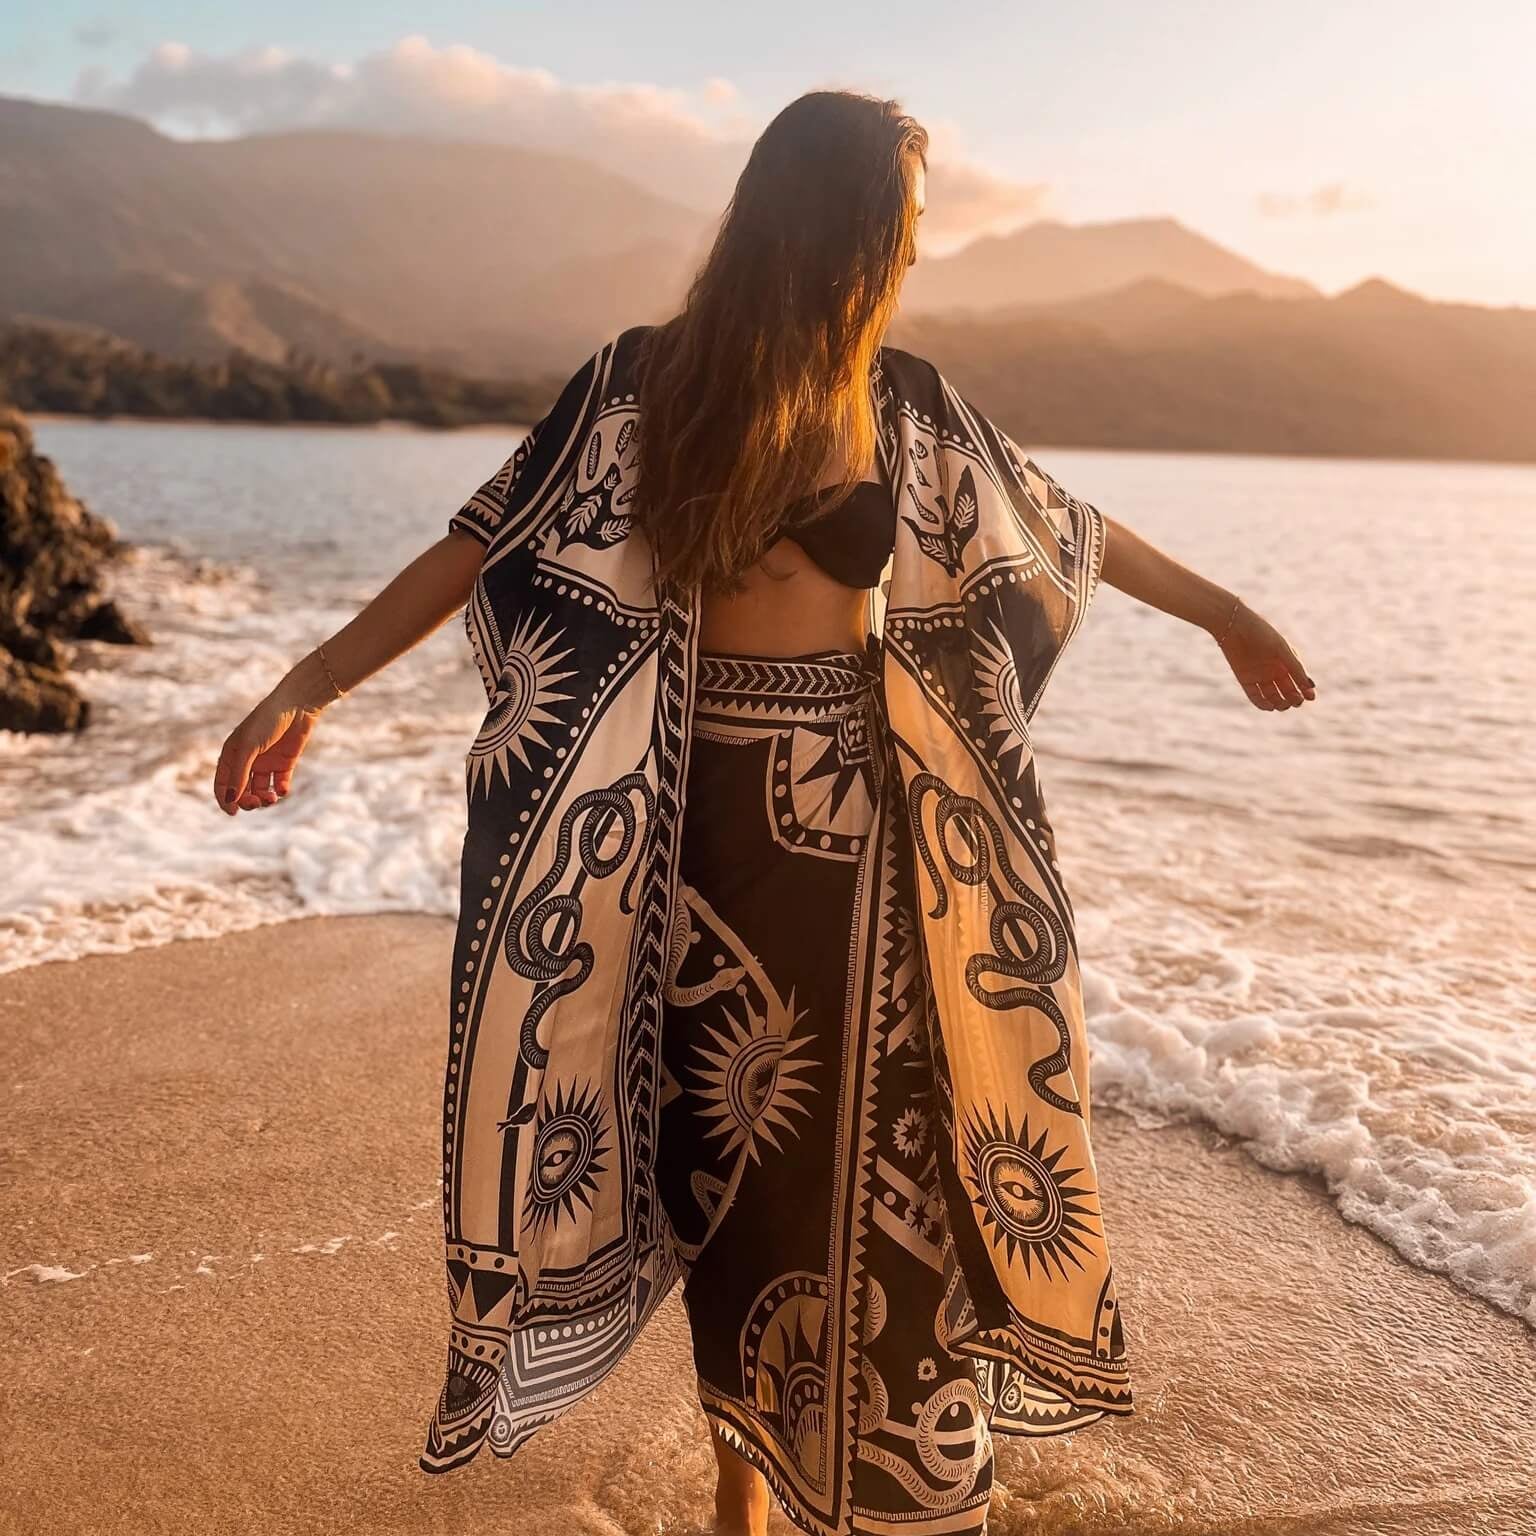 The designer of PLISSE, Paloma wearing the nazar kimono and wrap skirt. She is posing with her arms up on the sand at a beach during golden hour. This is the front of this flowy kimono.